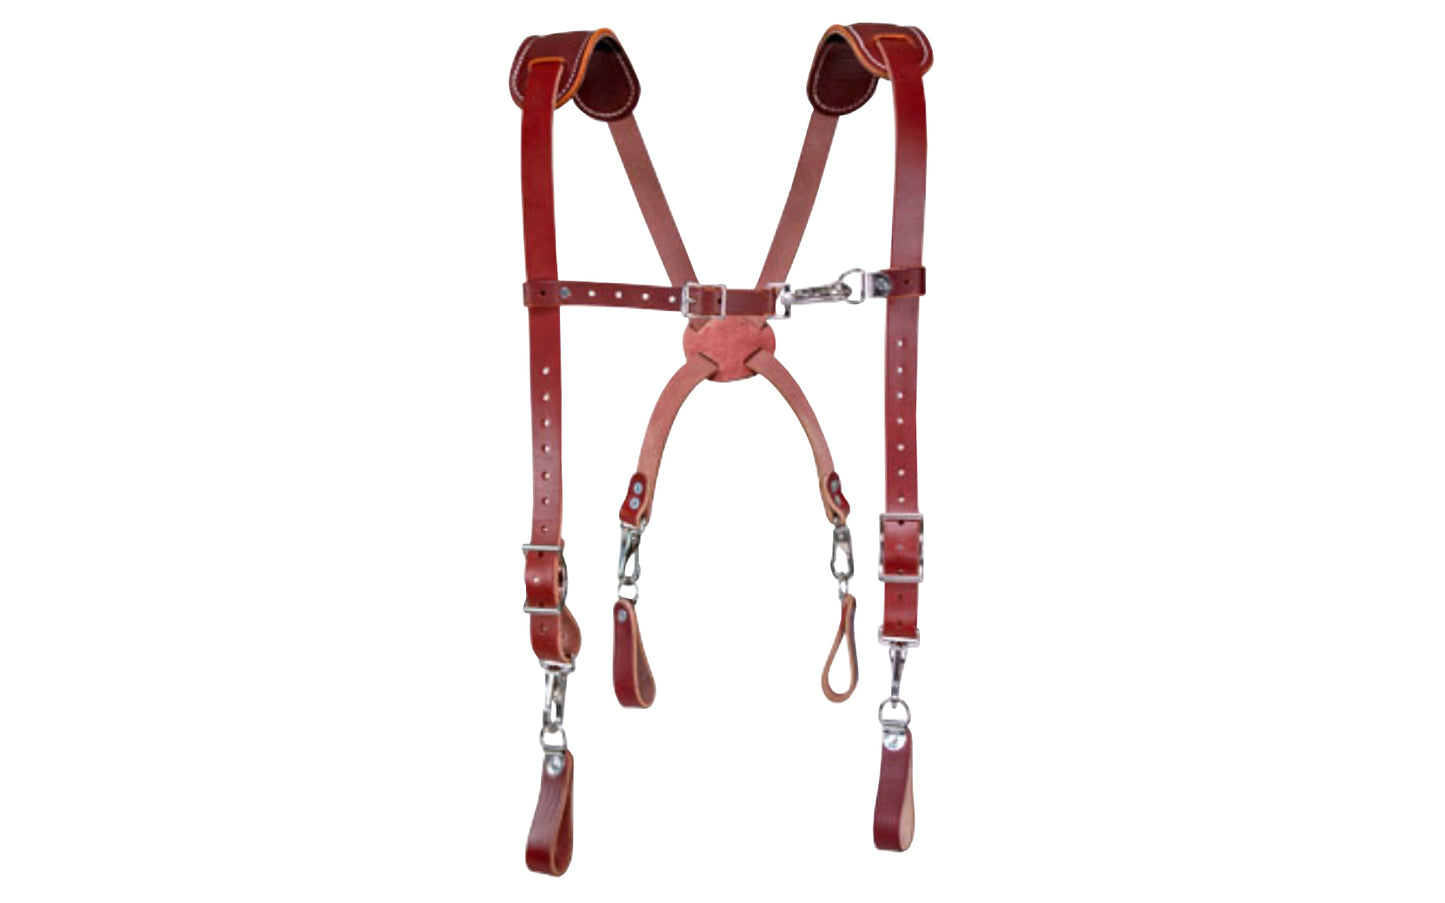 Occidental Leather traditional heavy duty leather suspenders are hand crafted from Bridle leather. Suspenders feature large shoulder pads. Heavy duty spring clips snap on & off your work belt with the direct connection loop hardware. Fully adjustable. Model No. 5009. 759244005202. Genuine Leather suspenders